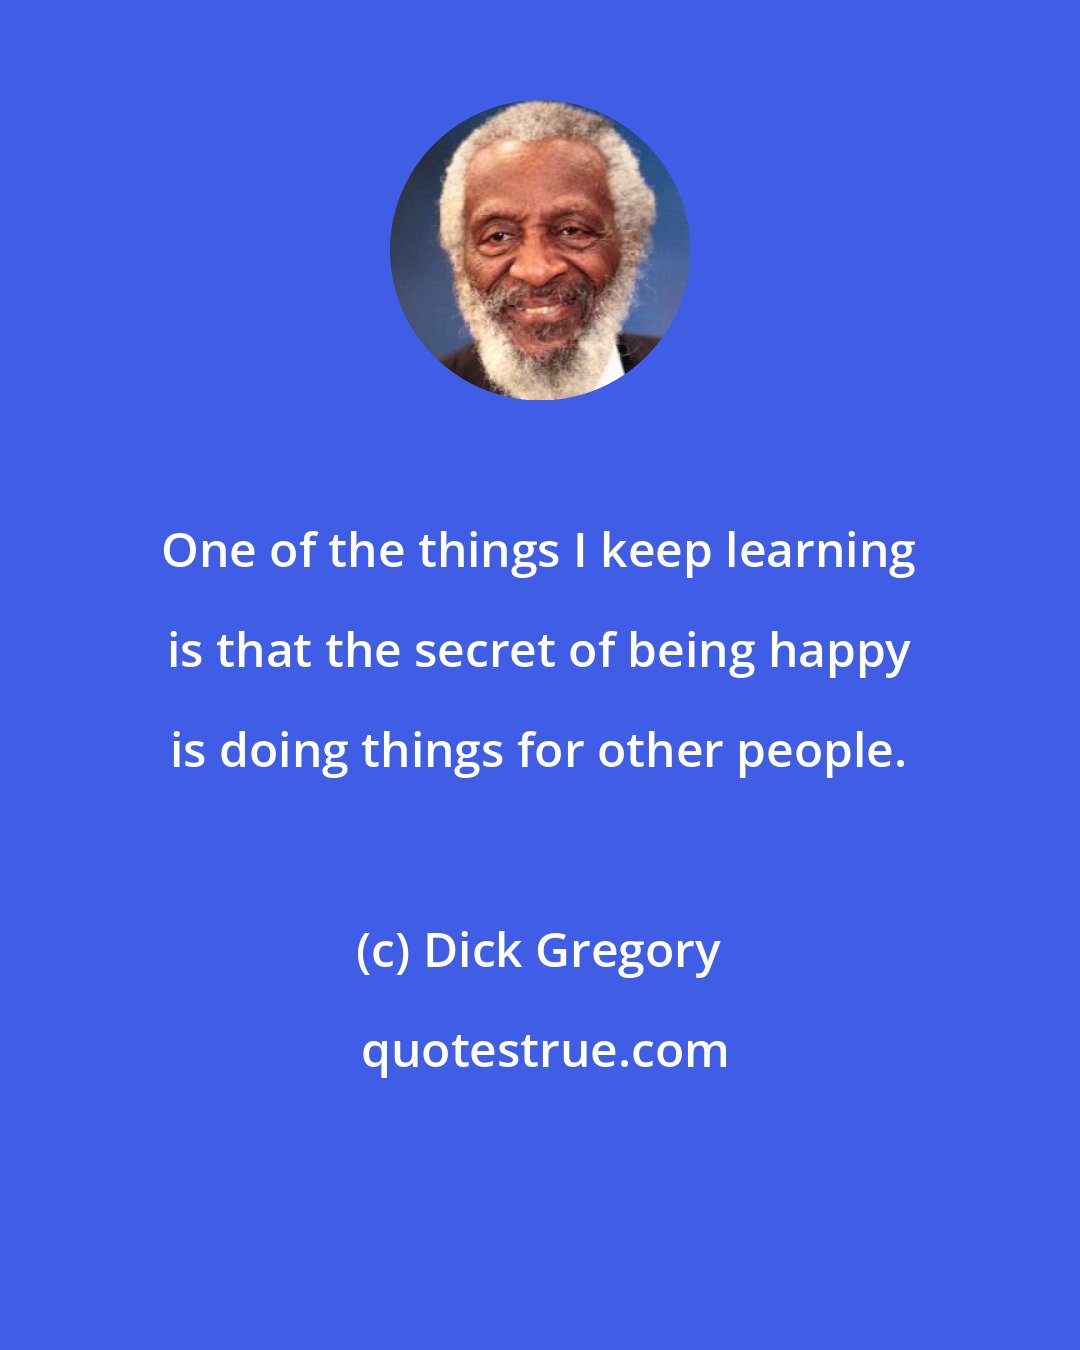 Dick Gregory: One of the things I keep learning is that the secret of being happy is doing things for other people.